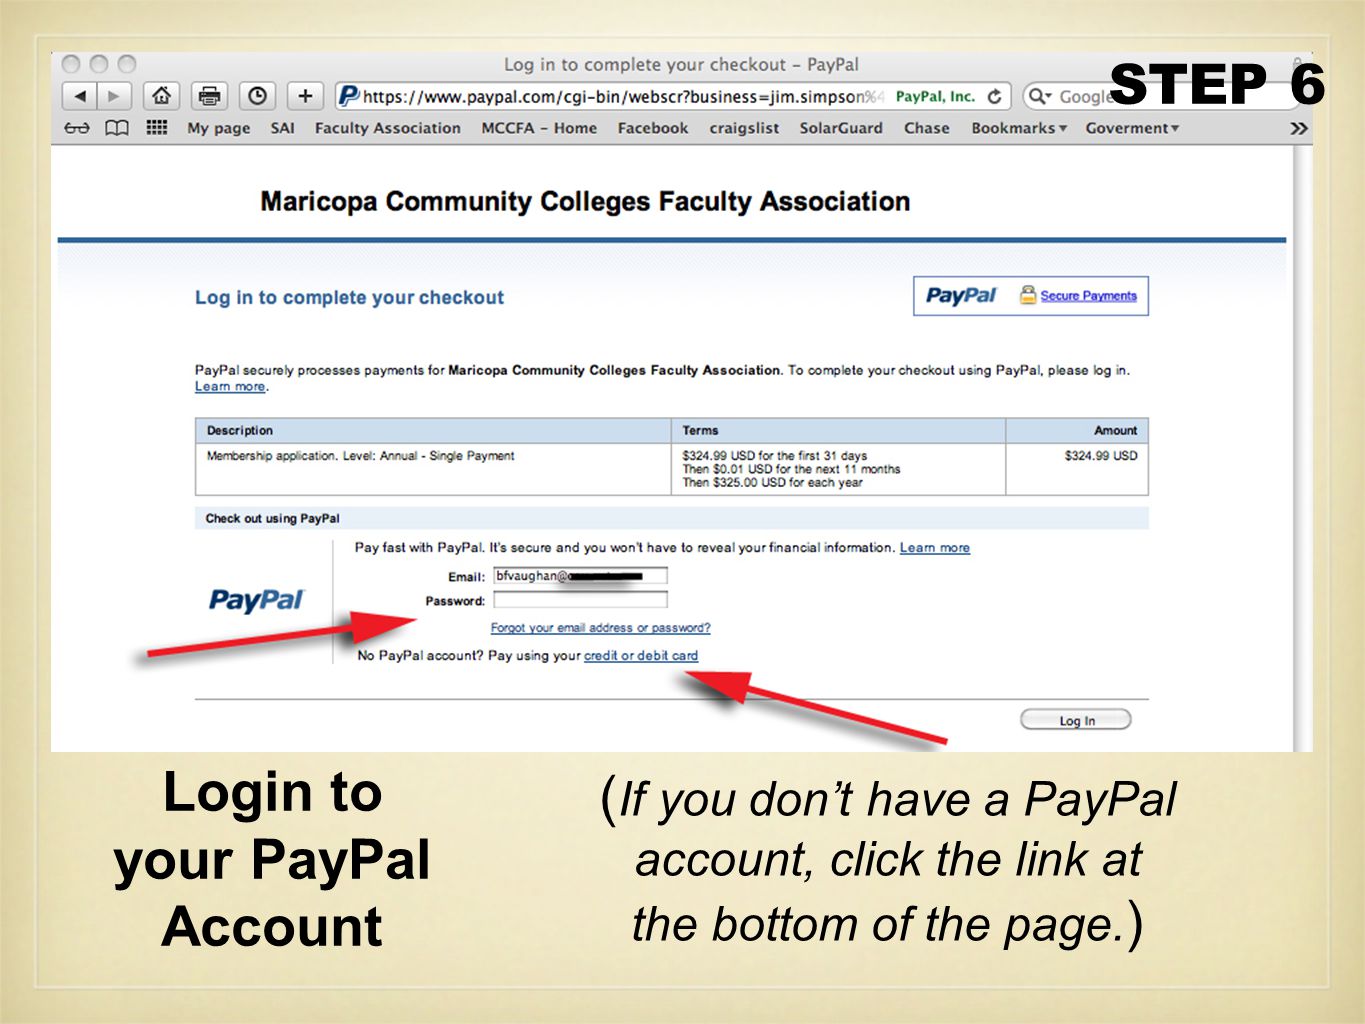 ( If you don’t have a PayPal account, click the link at the bottom of the page.